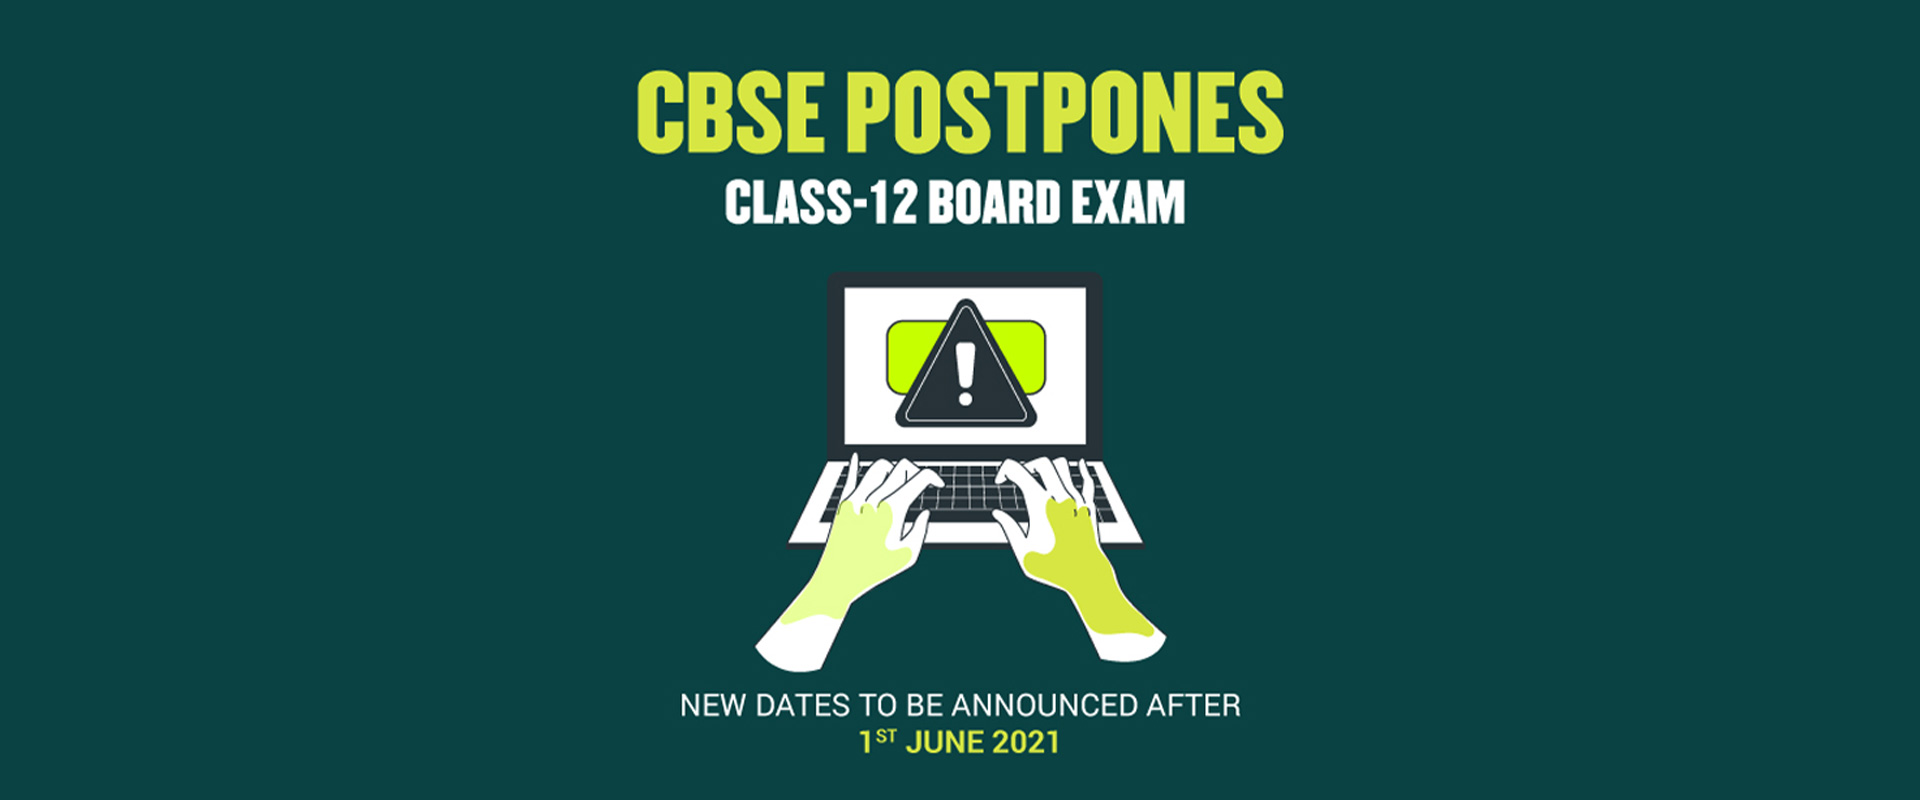 CBSE postpones Class 12 Board Exam and Cancels them for Class 10